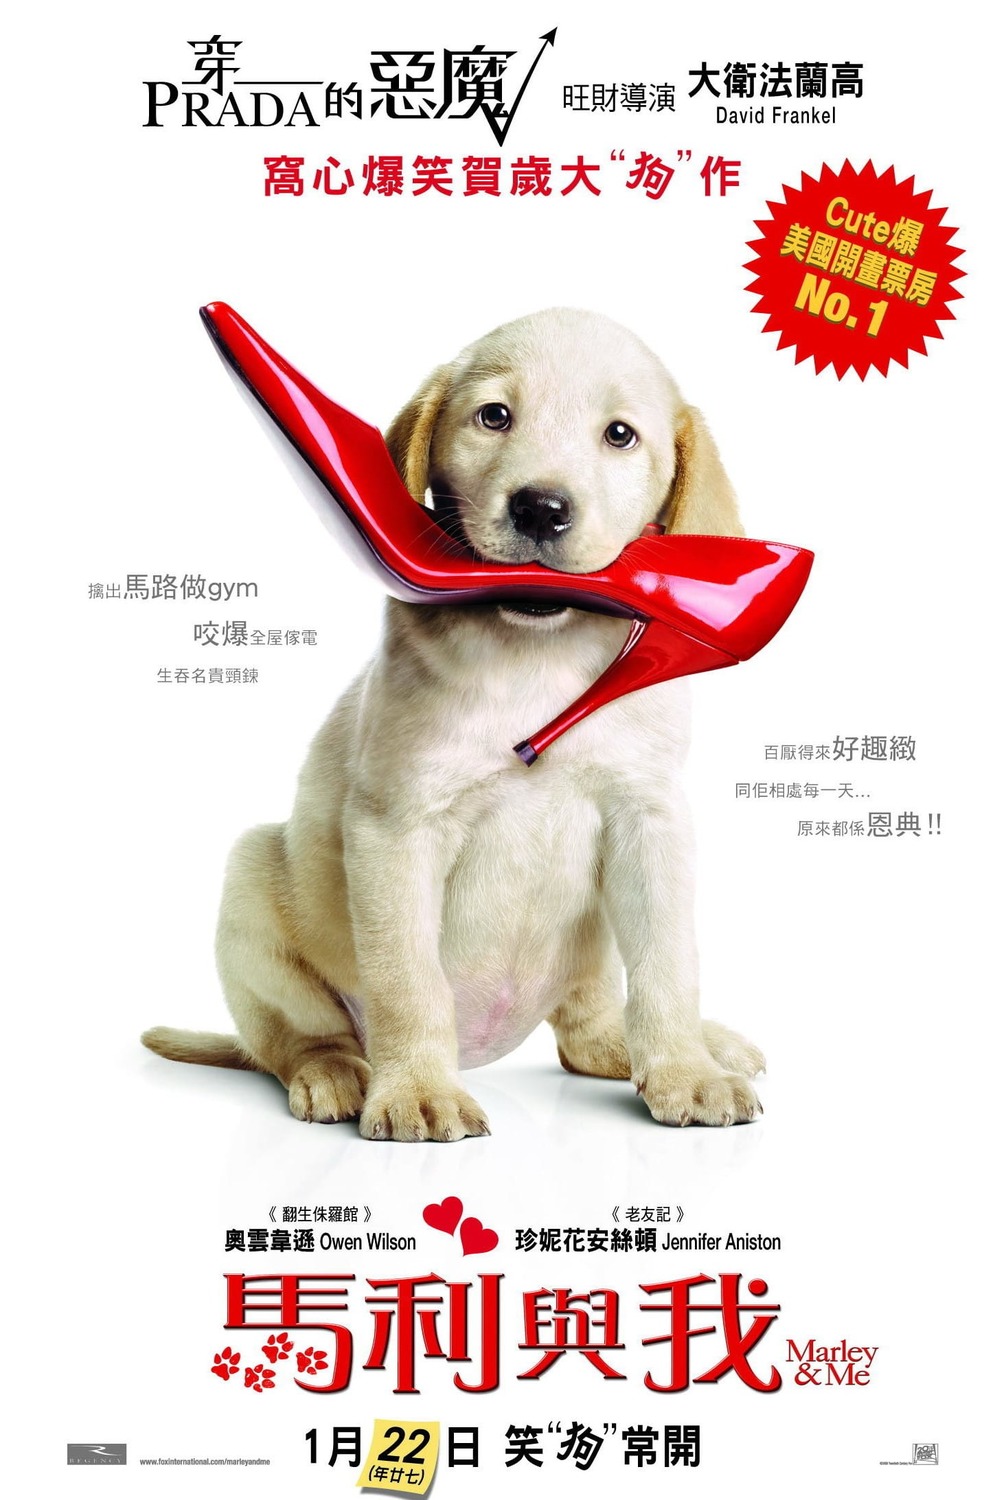 Extra Large Movie Poster Image for Marley & Me (#3 of 7)